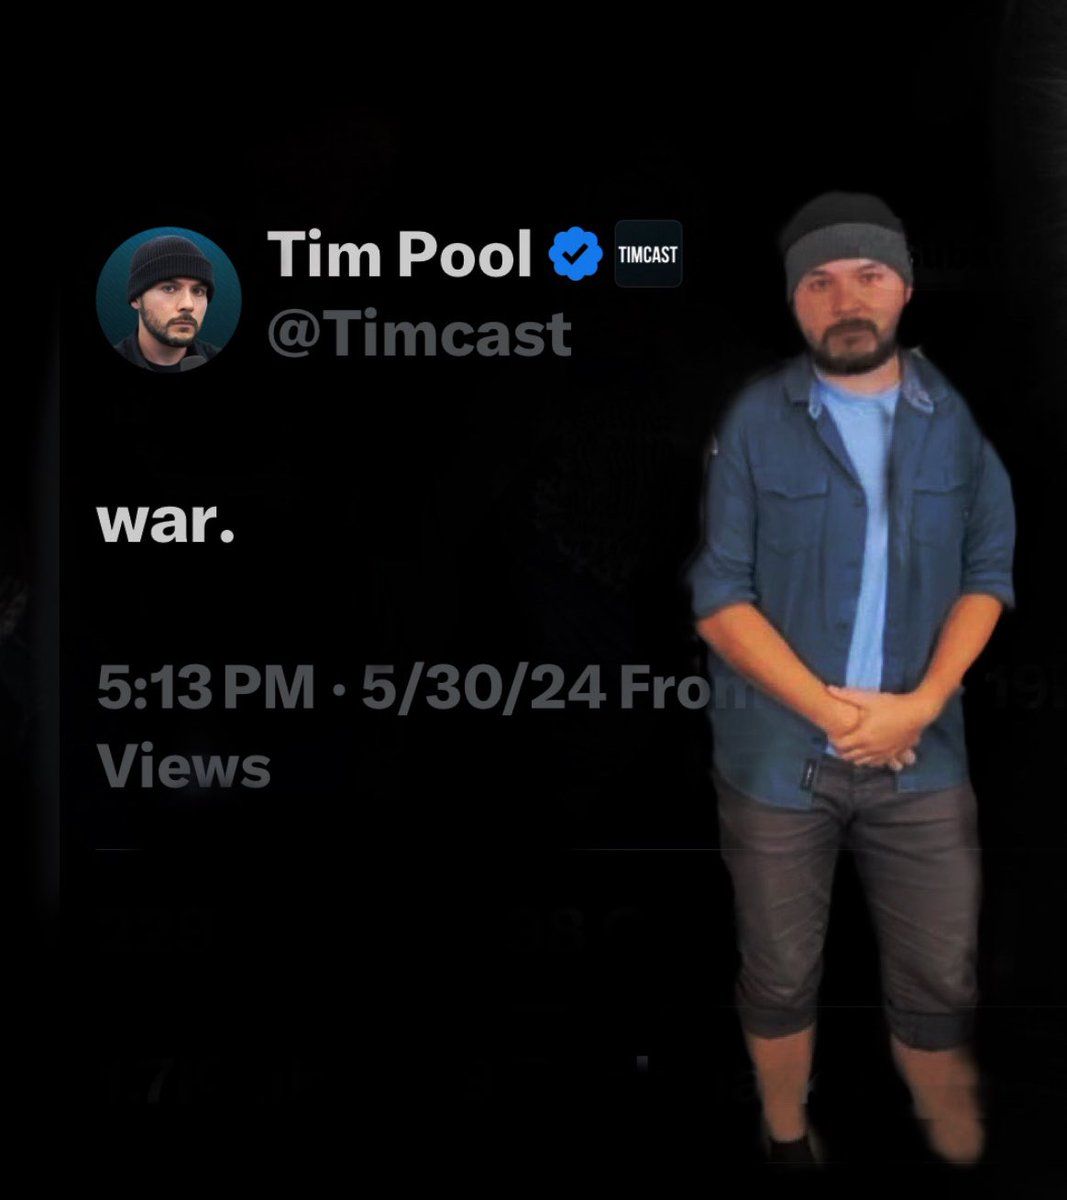 Tim Pool is ready to lead our nation’s brave Timcels into glorious battle, guaranteeing victory in the civil war.